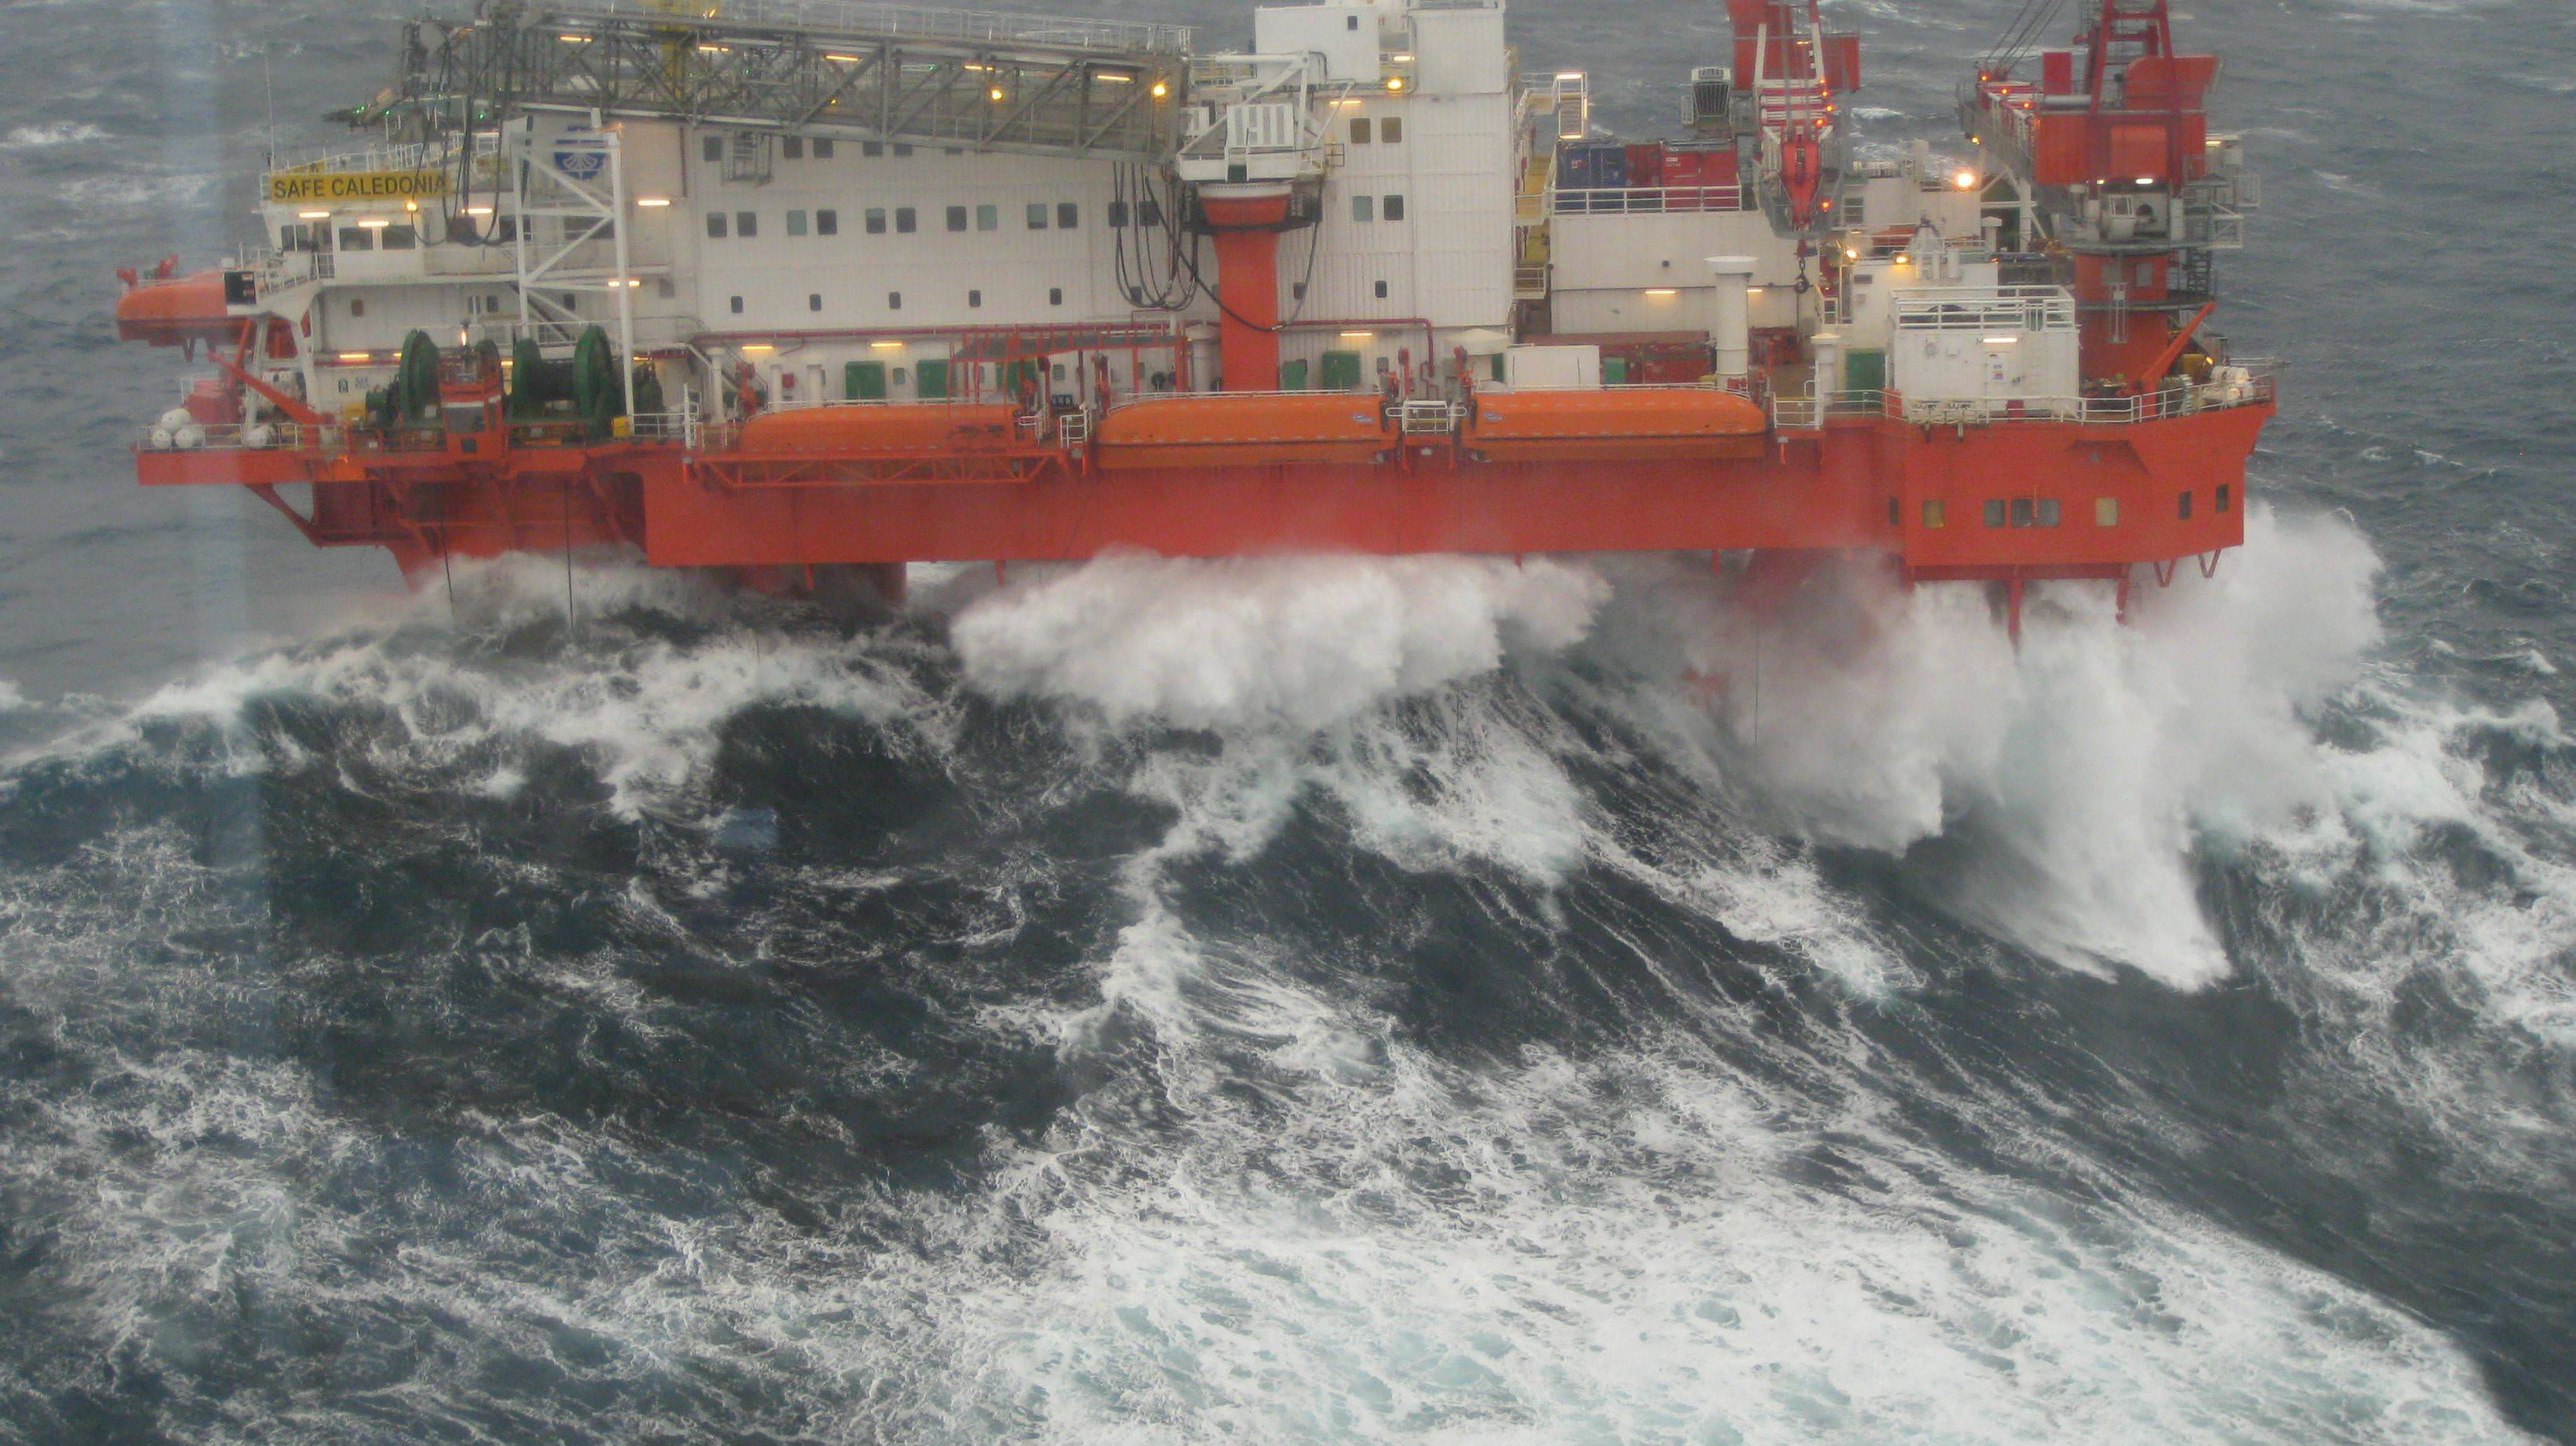 Safe Caledonia battered by waves